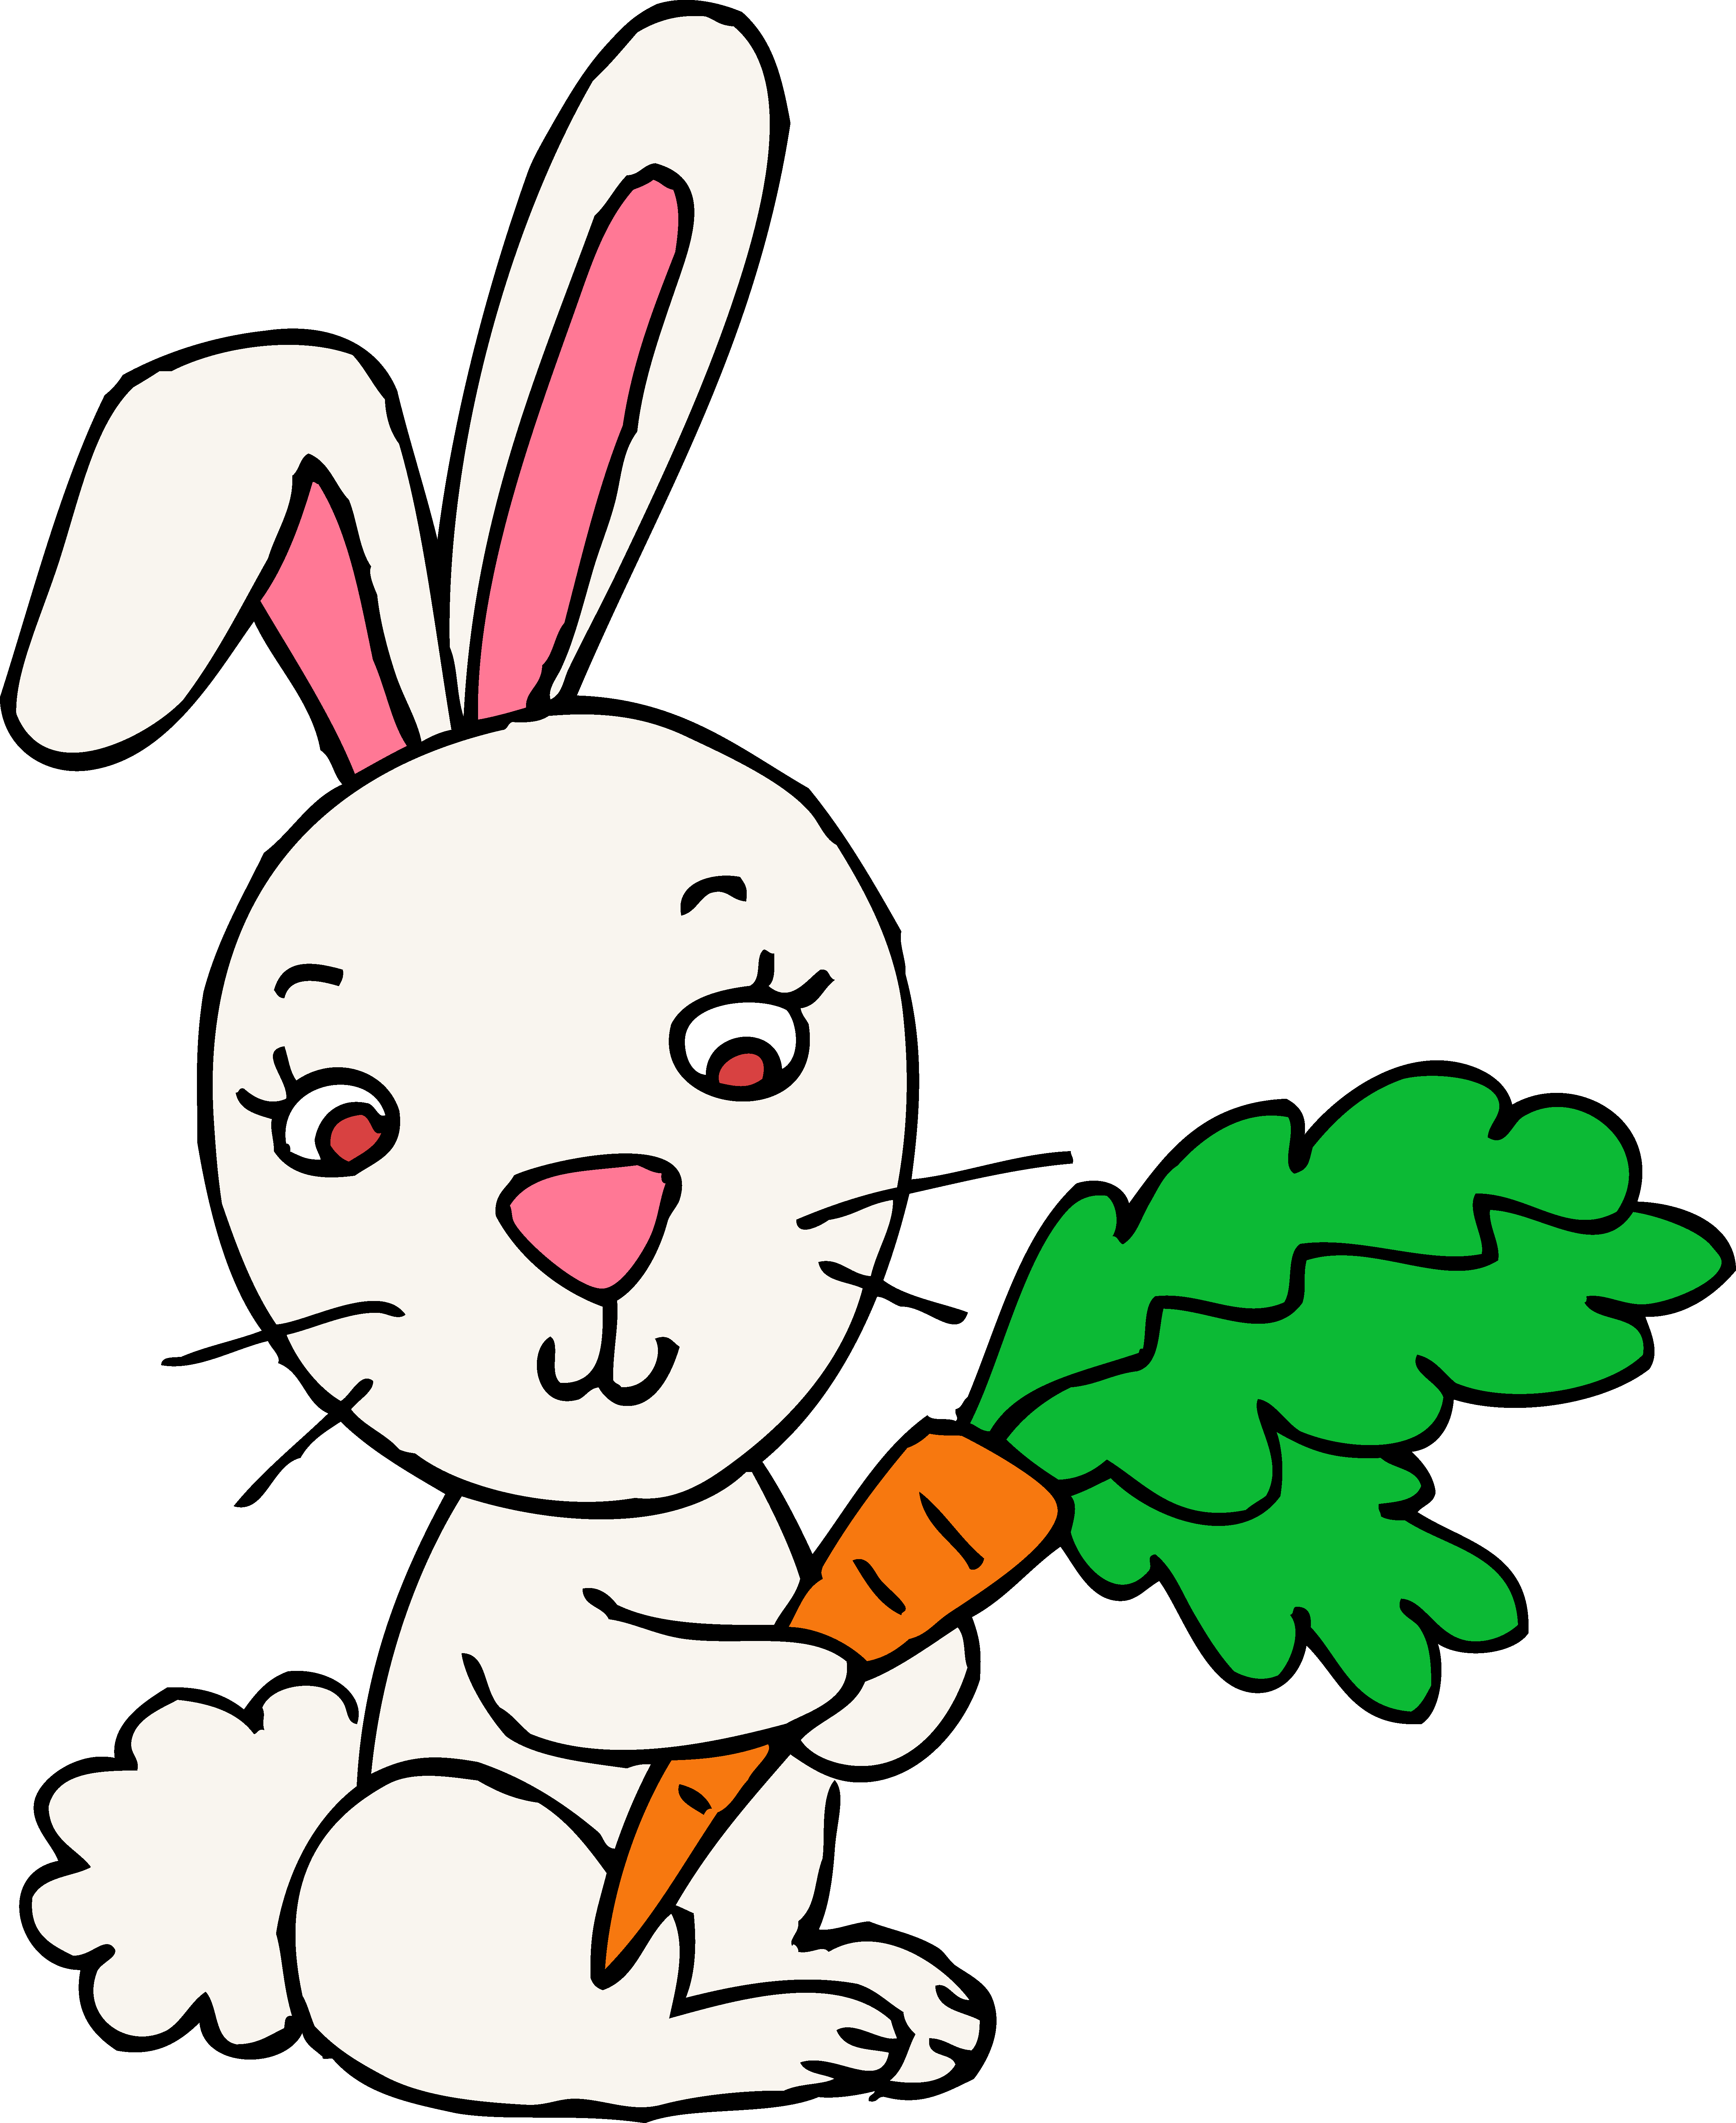 Cute rabbit hopping clipart black and white